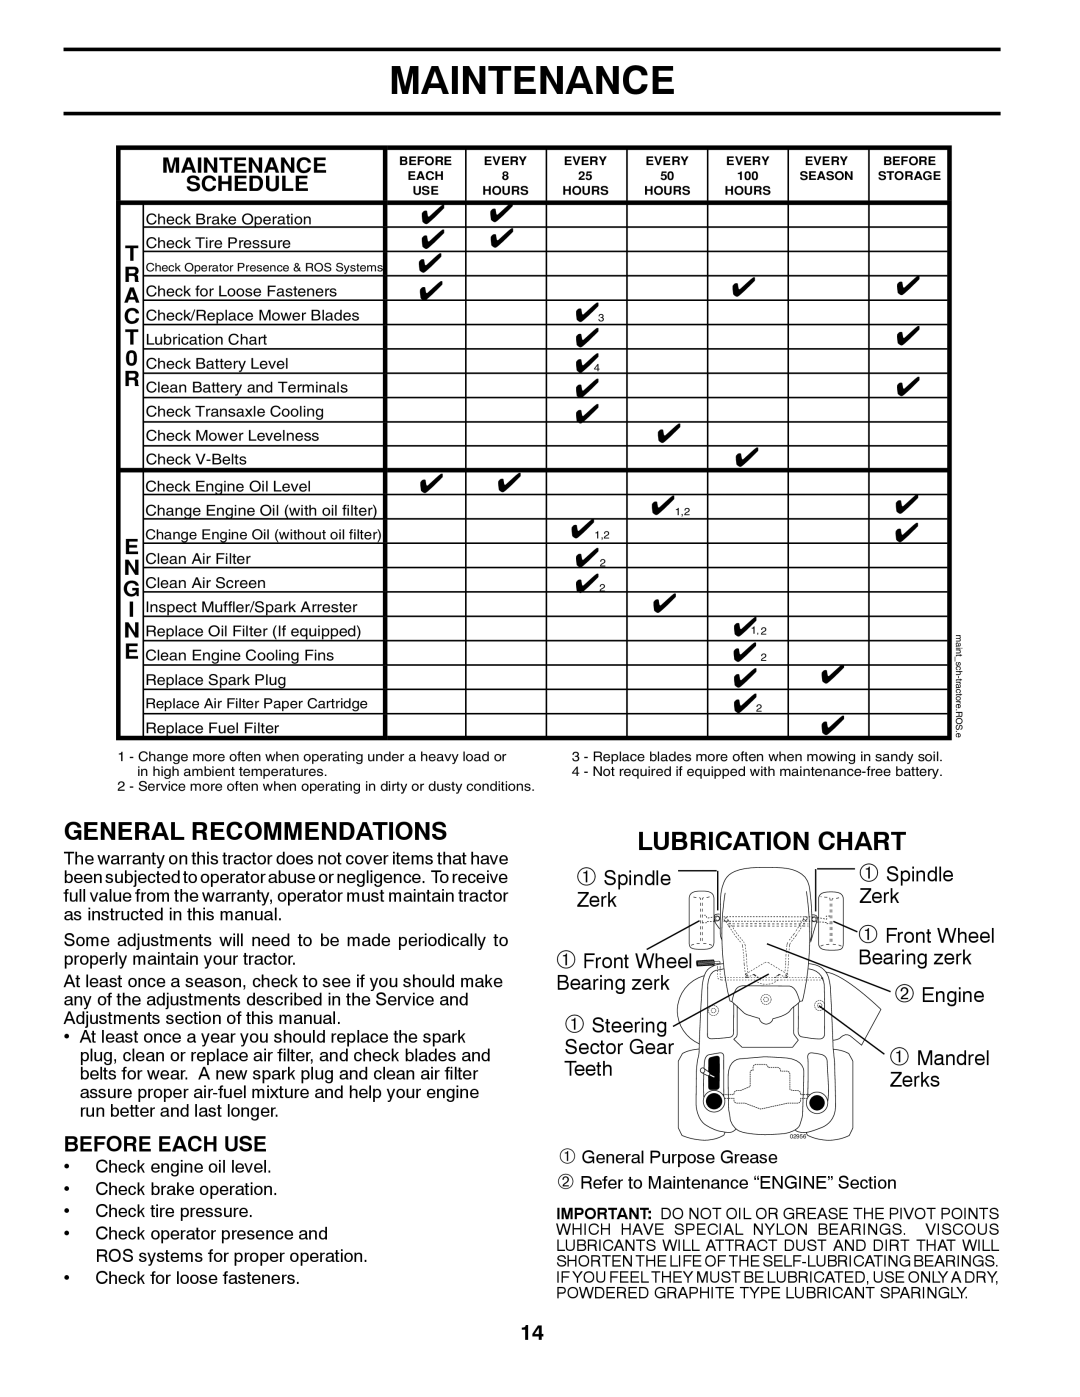 Husqvarna 2748 GLS (CA) manual Maintenance, General Recommendations, Lubrication Chart, Schedule, Before Each Use 